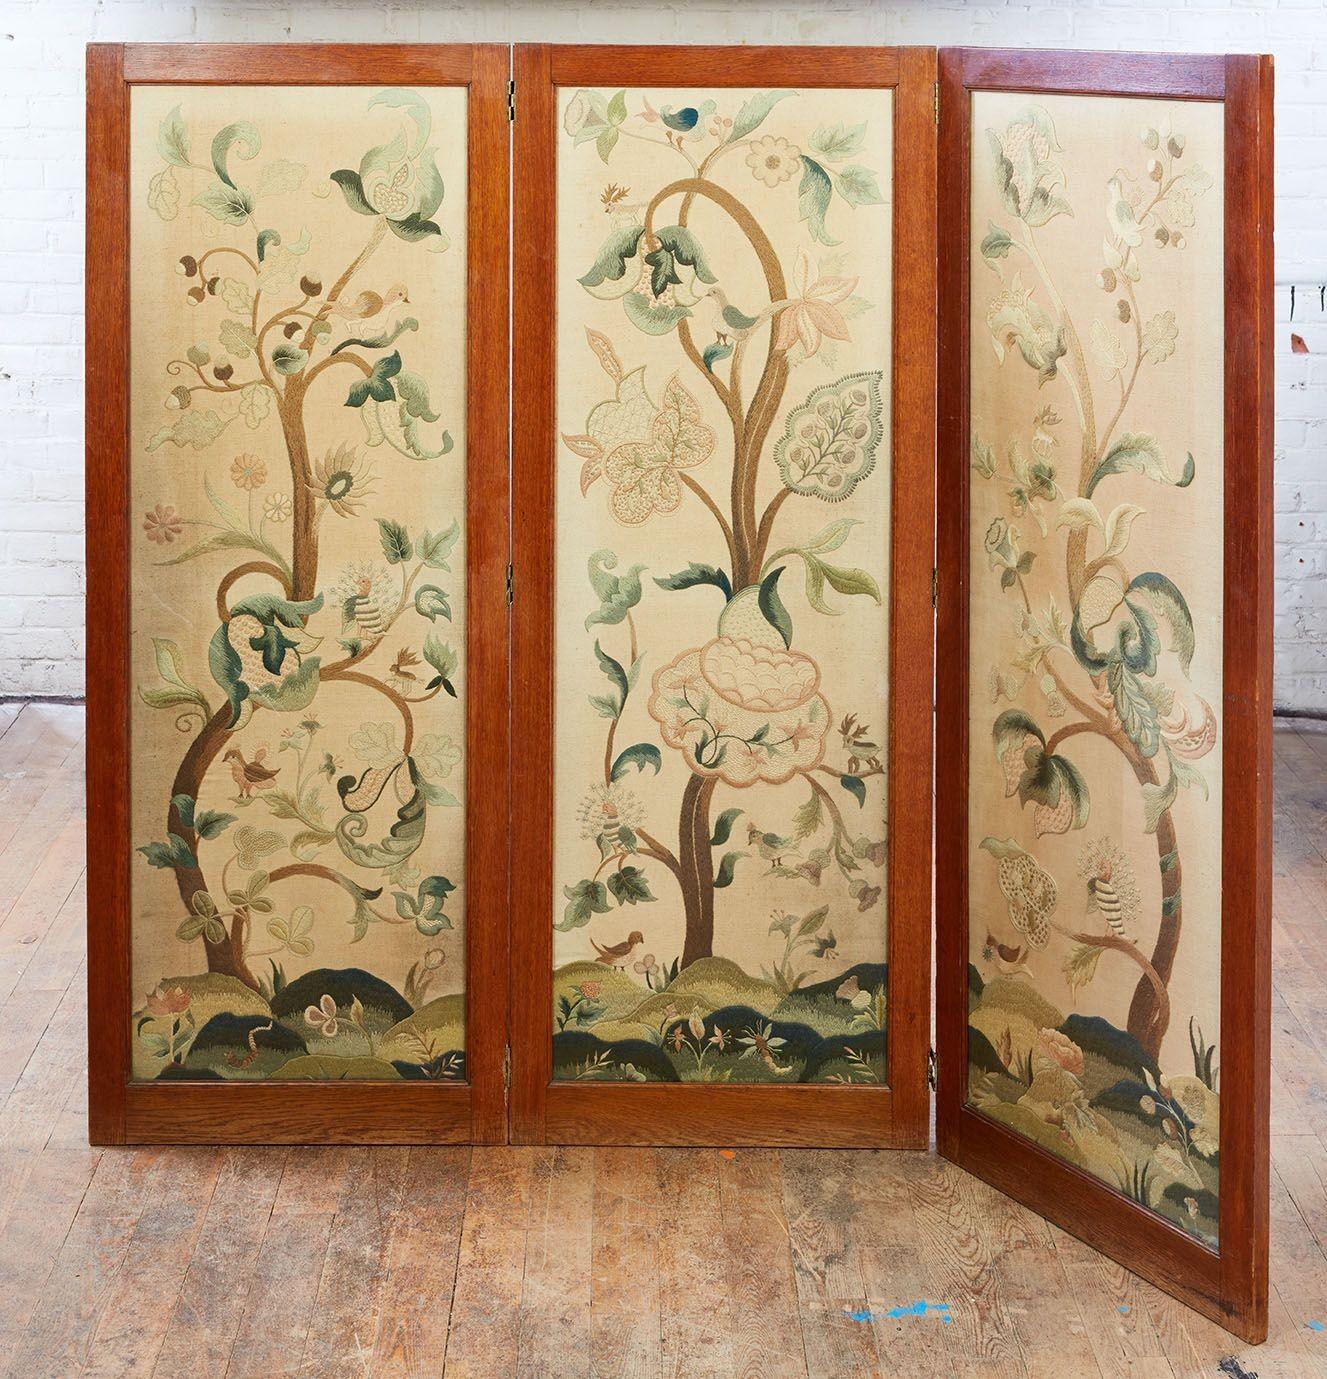 A three paneled English hand-embroidered crewelwork screen in a substantial oak frame with brass hinges. The crewelwork features vine and flower design with birds and deer on a stylized forest surface. Wool stitching on a linen ground. Fine quality.